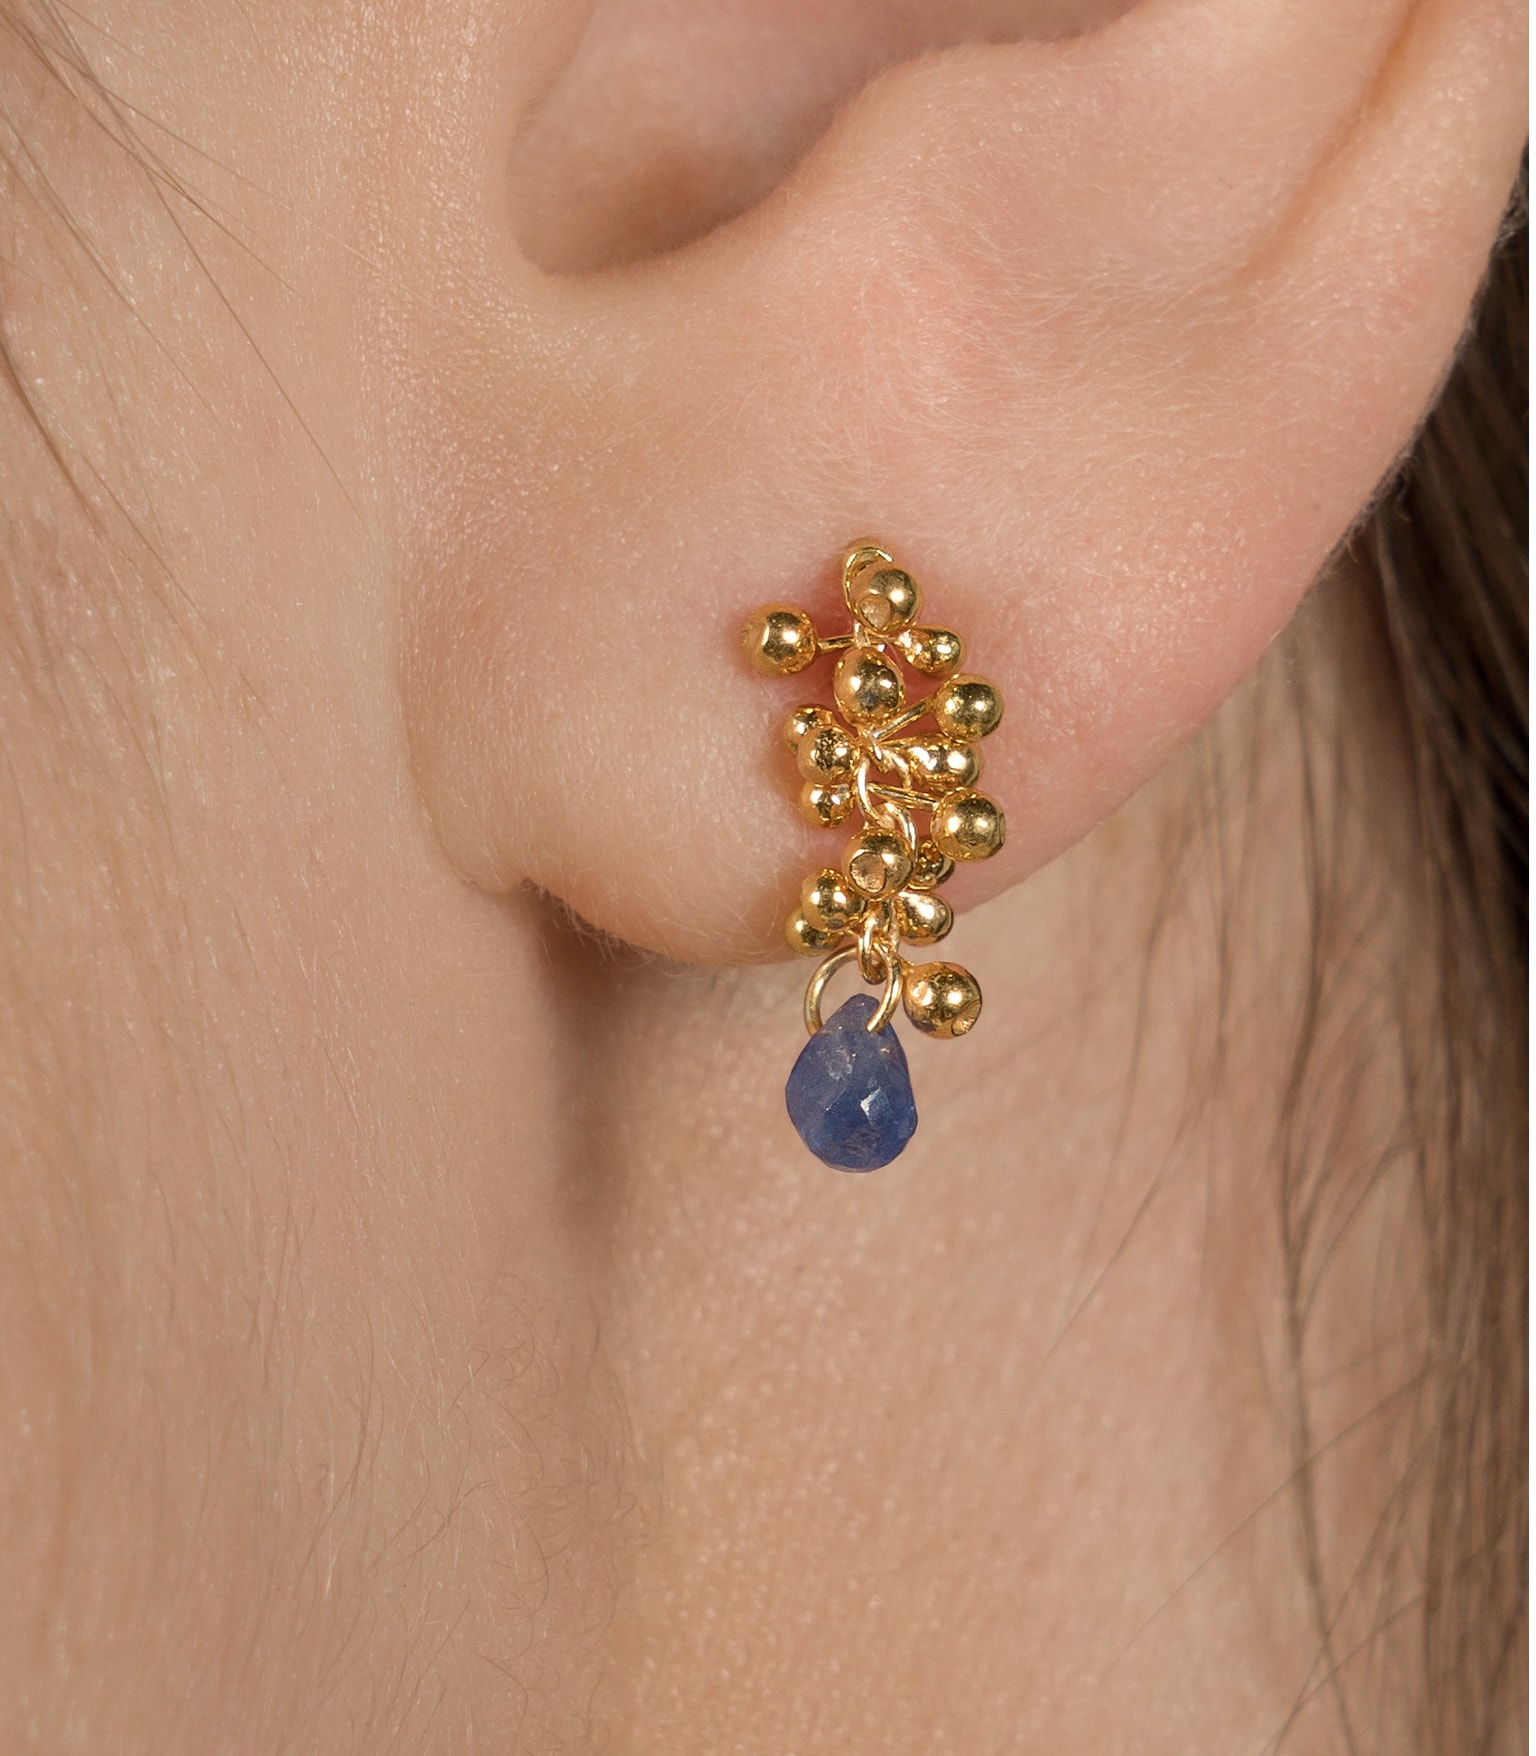 Sapphire and gold plated silver earrings worn by a model